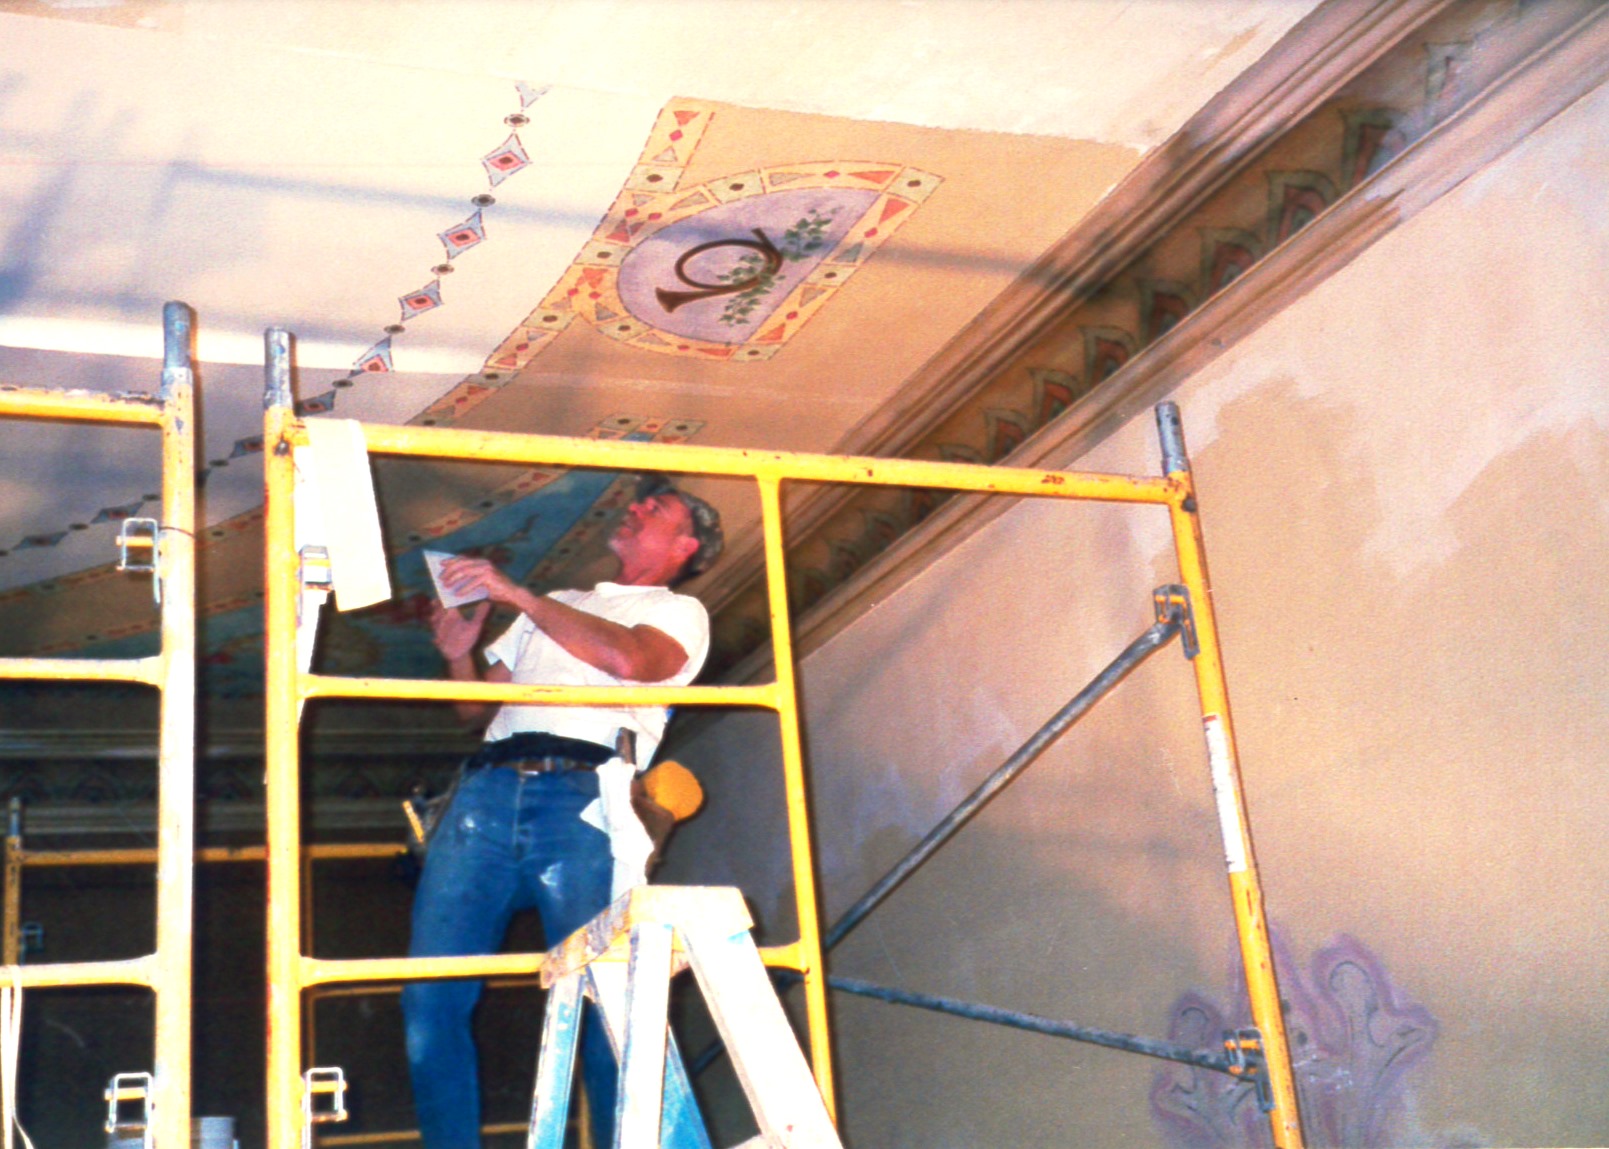 Restoration work on the wall and ceiling decorations of the 1905 Elks Opera House in Prescott, Arizona